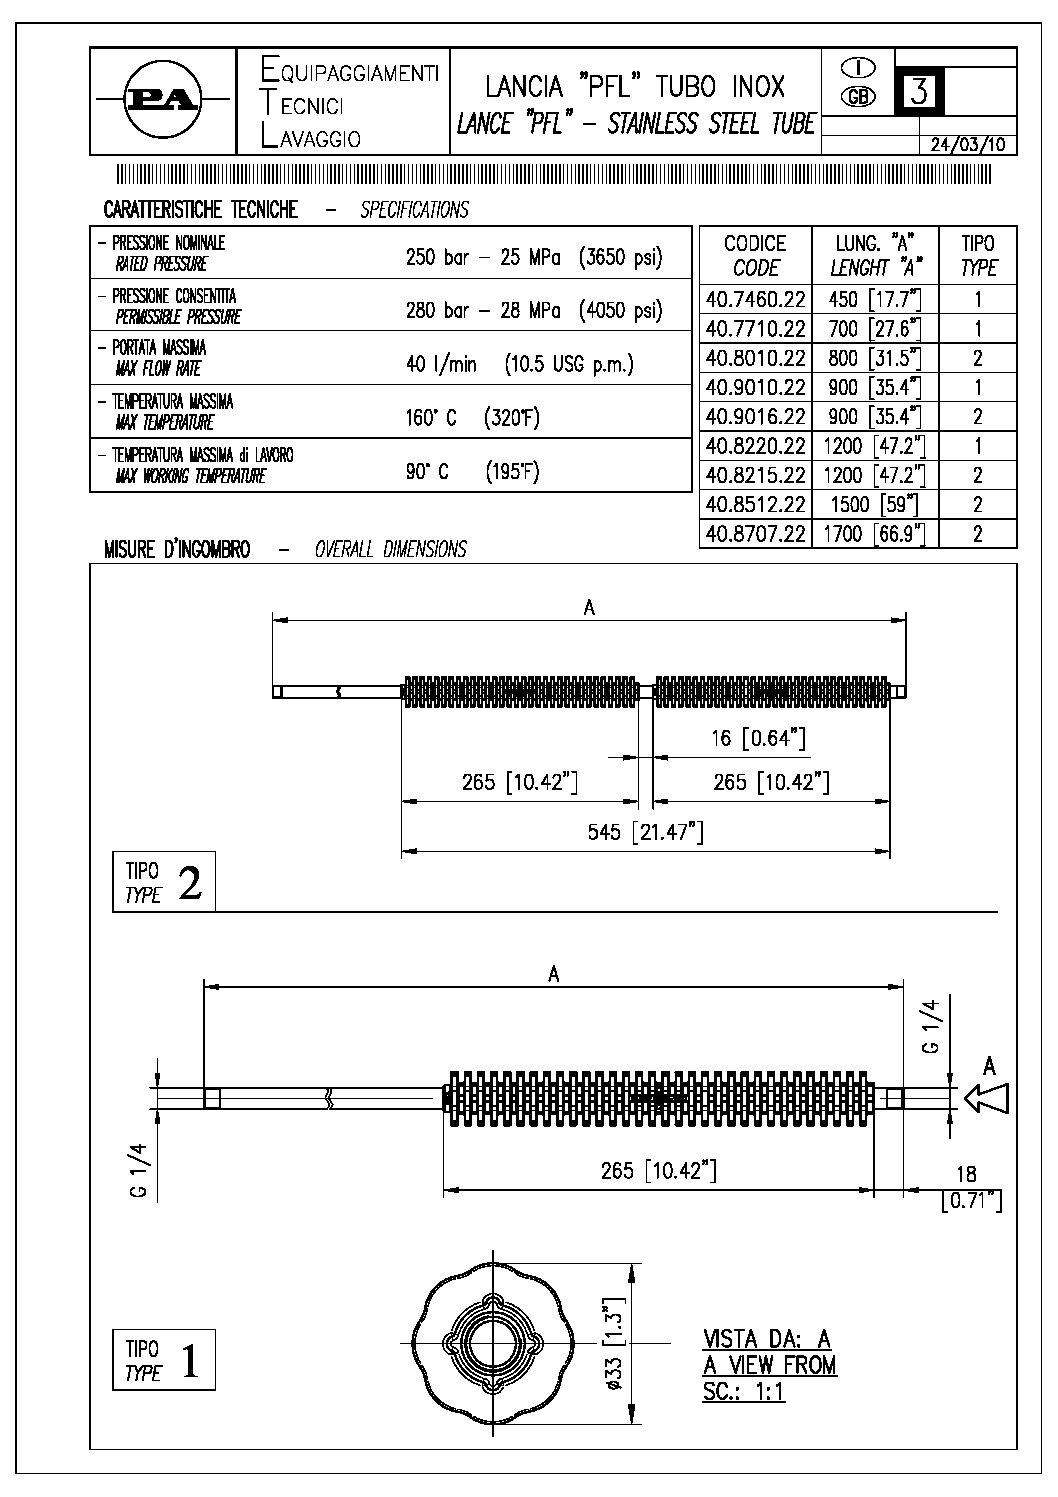 PA Stainless Steel Straight Tube Lance technical information